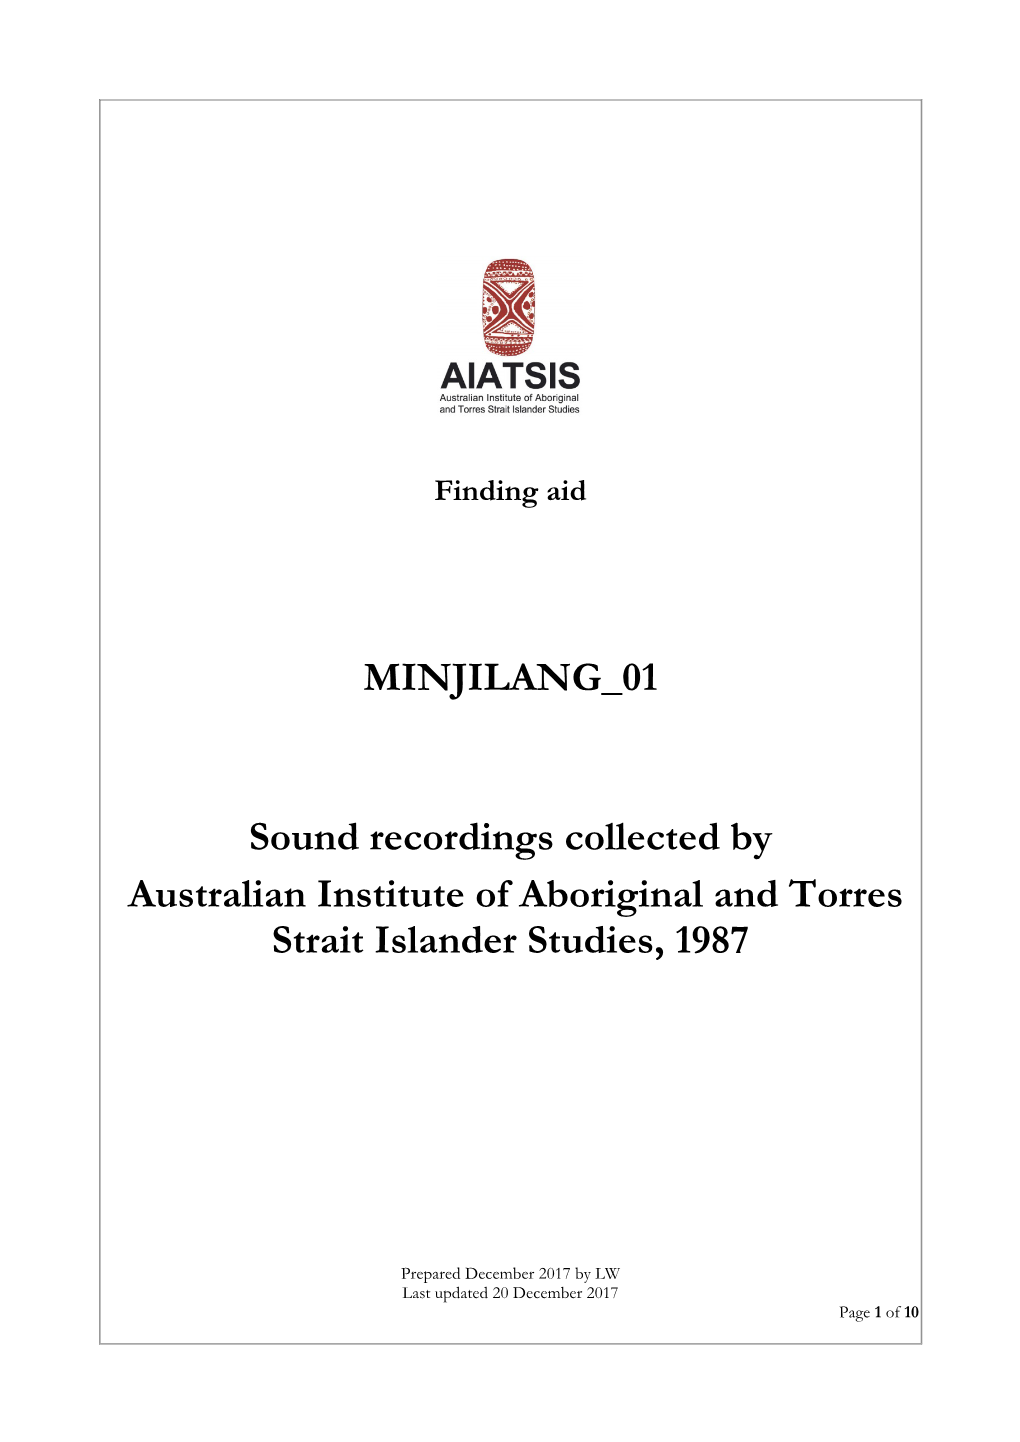 Guide to Sound Recordings Collected by Australian Institute of Aboriginal